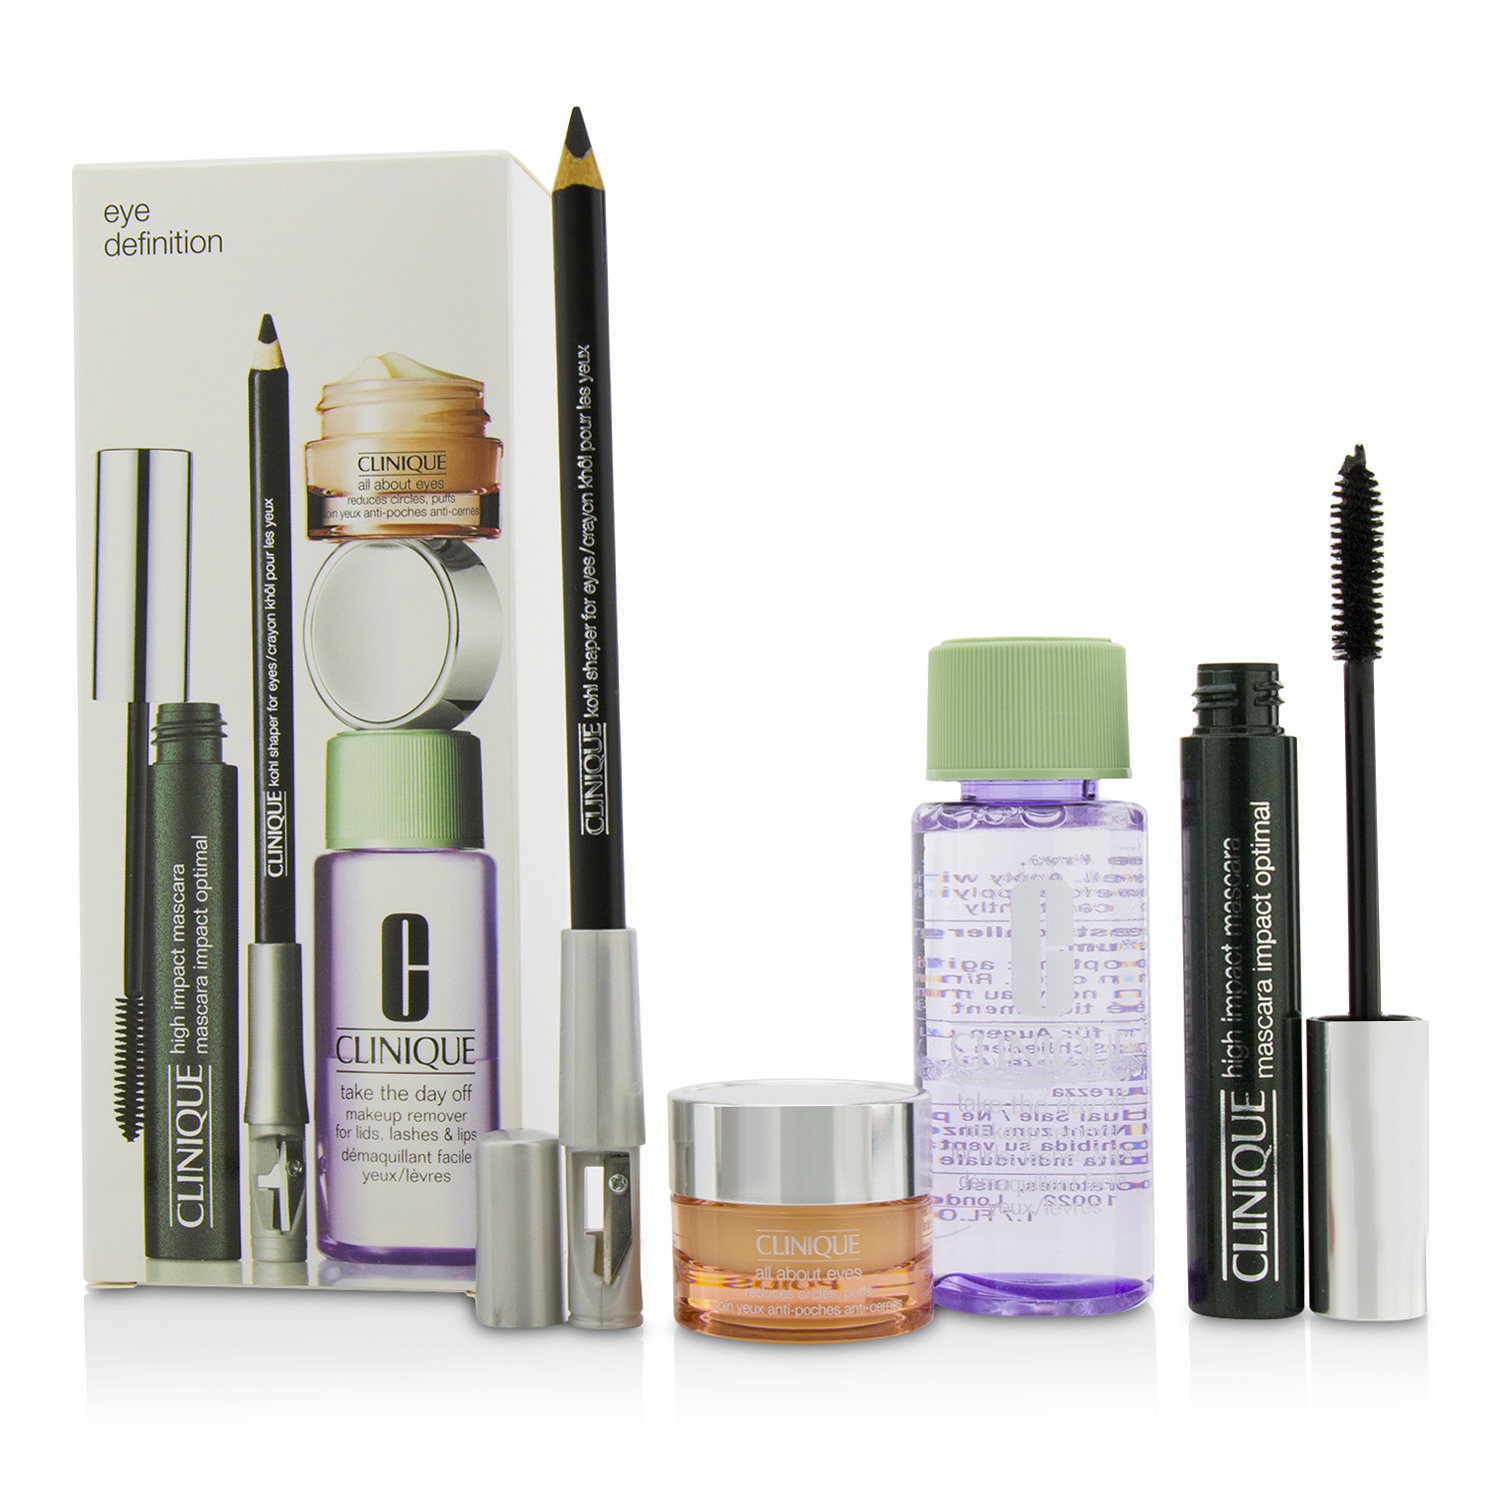 Eye Definition Set: 1x Kohl Shaper For Eyes + 1x High Impact Mascara + 1x Makeup Remover + 1x All About Eyes Clinique Image